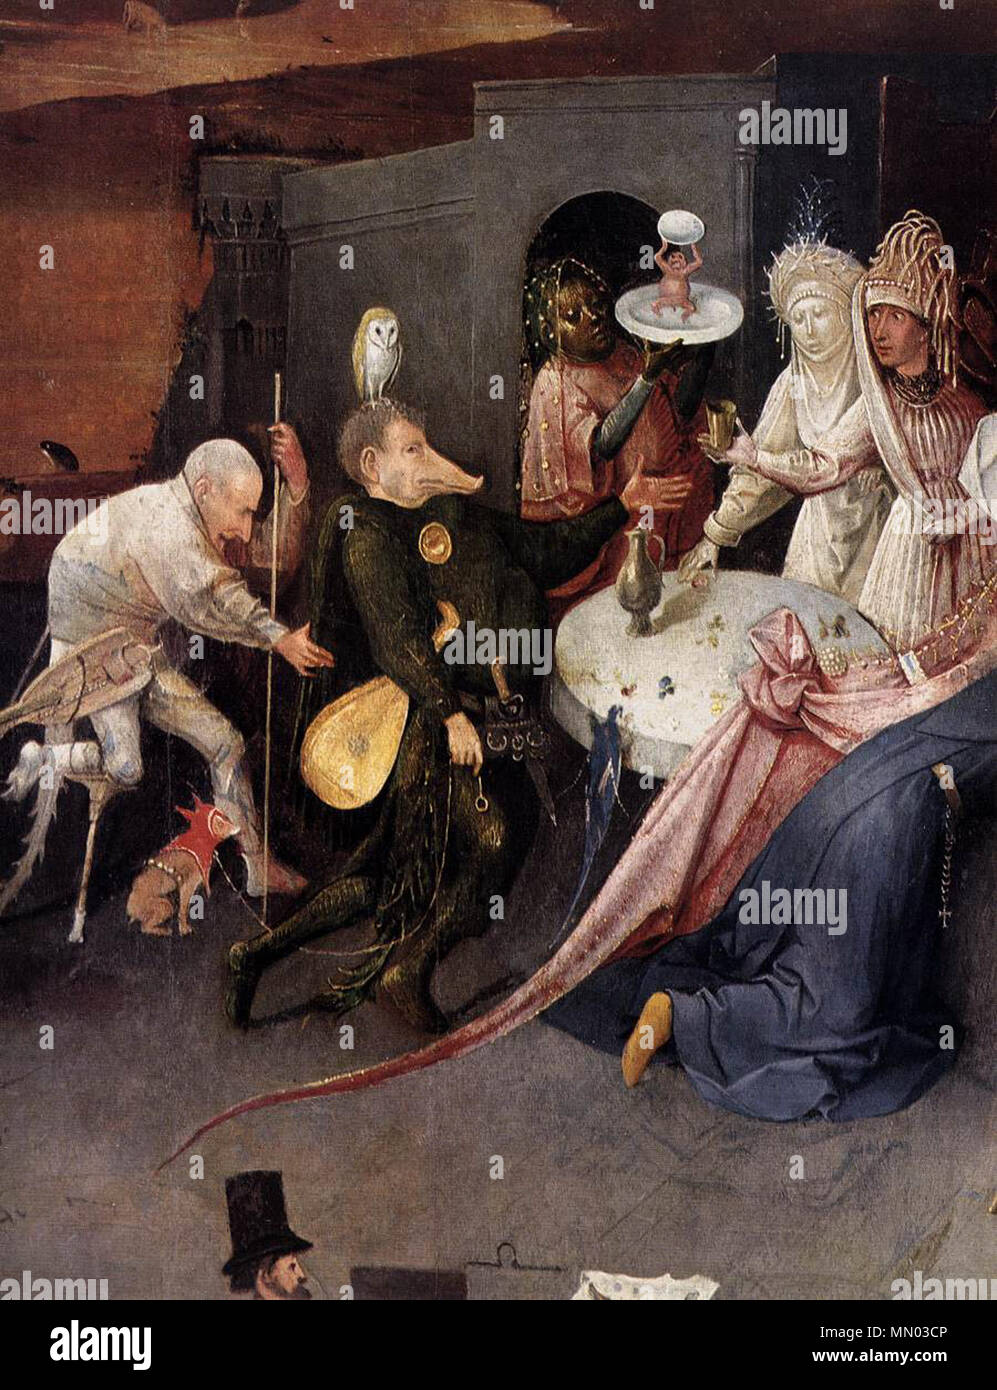 The Temptation of Saint Anthony [detail].. between 1495 and 1515. Hieronymus  Bosch - Triptych of Temptation of St Anthony (detail) - WGA2591 Stock Photo  - Alamy